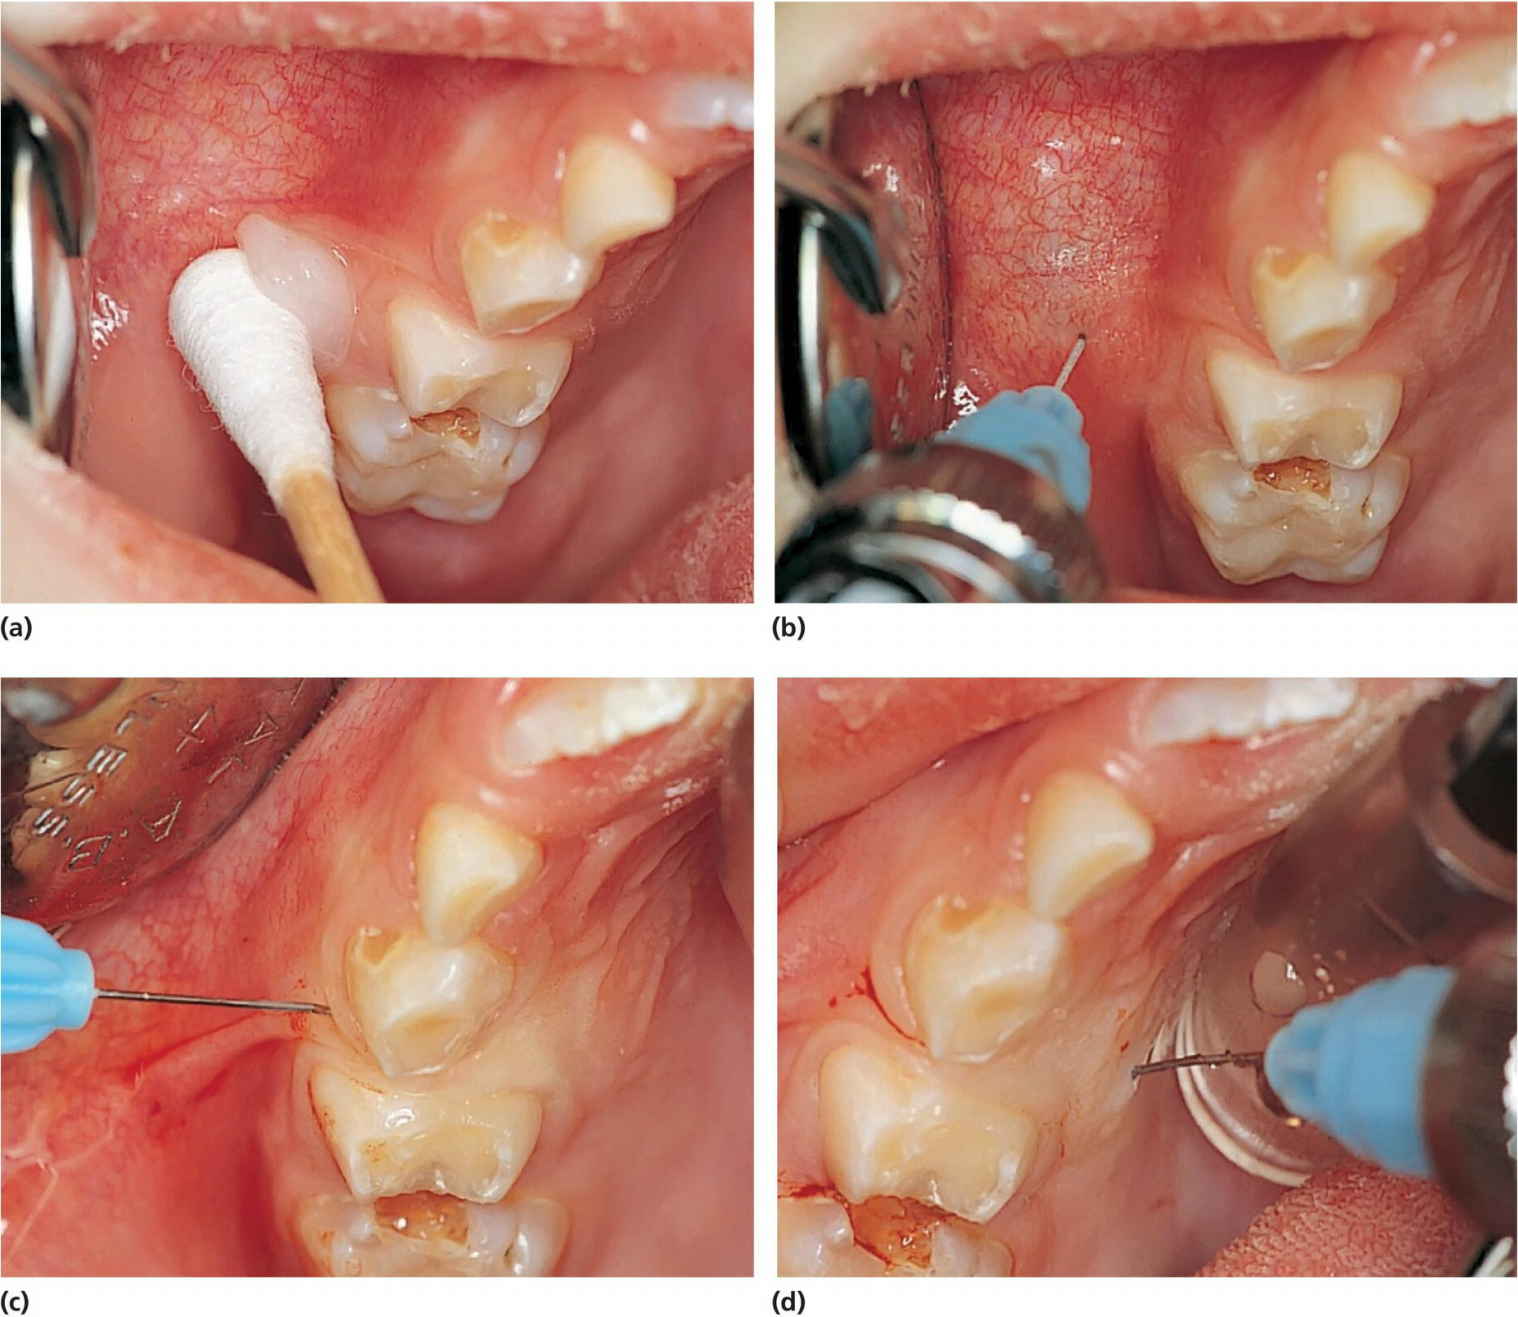 Photos displaying a cotton bud with ointment at the injection spot (a), infiltration analgesia followed by a transpapillary injection starting from the buccal and continuing to the palatal mucosa (b–d).